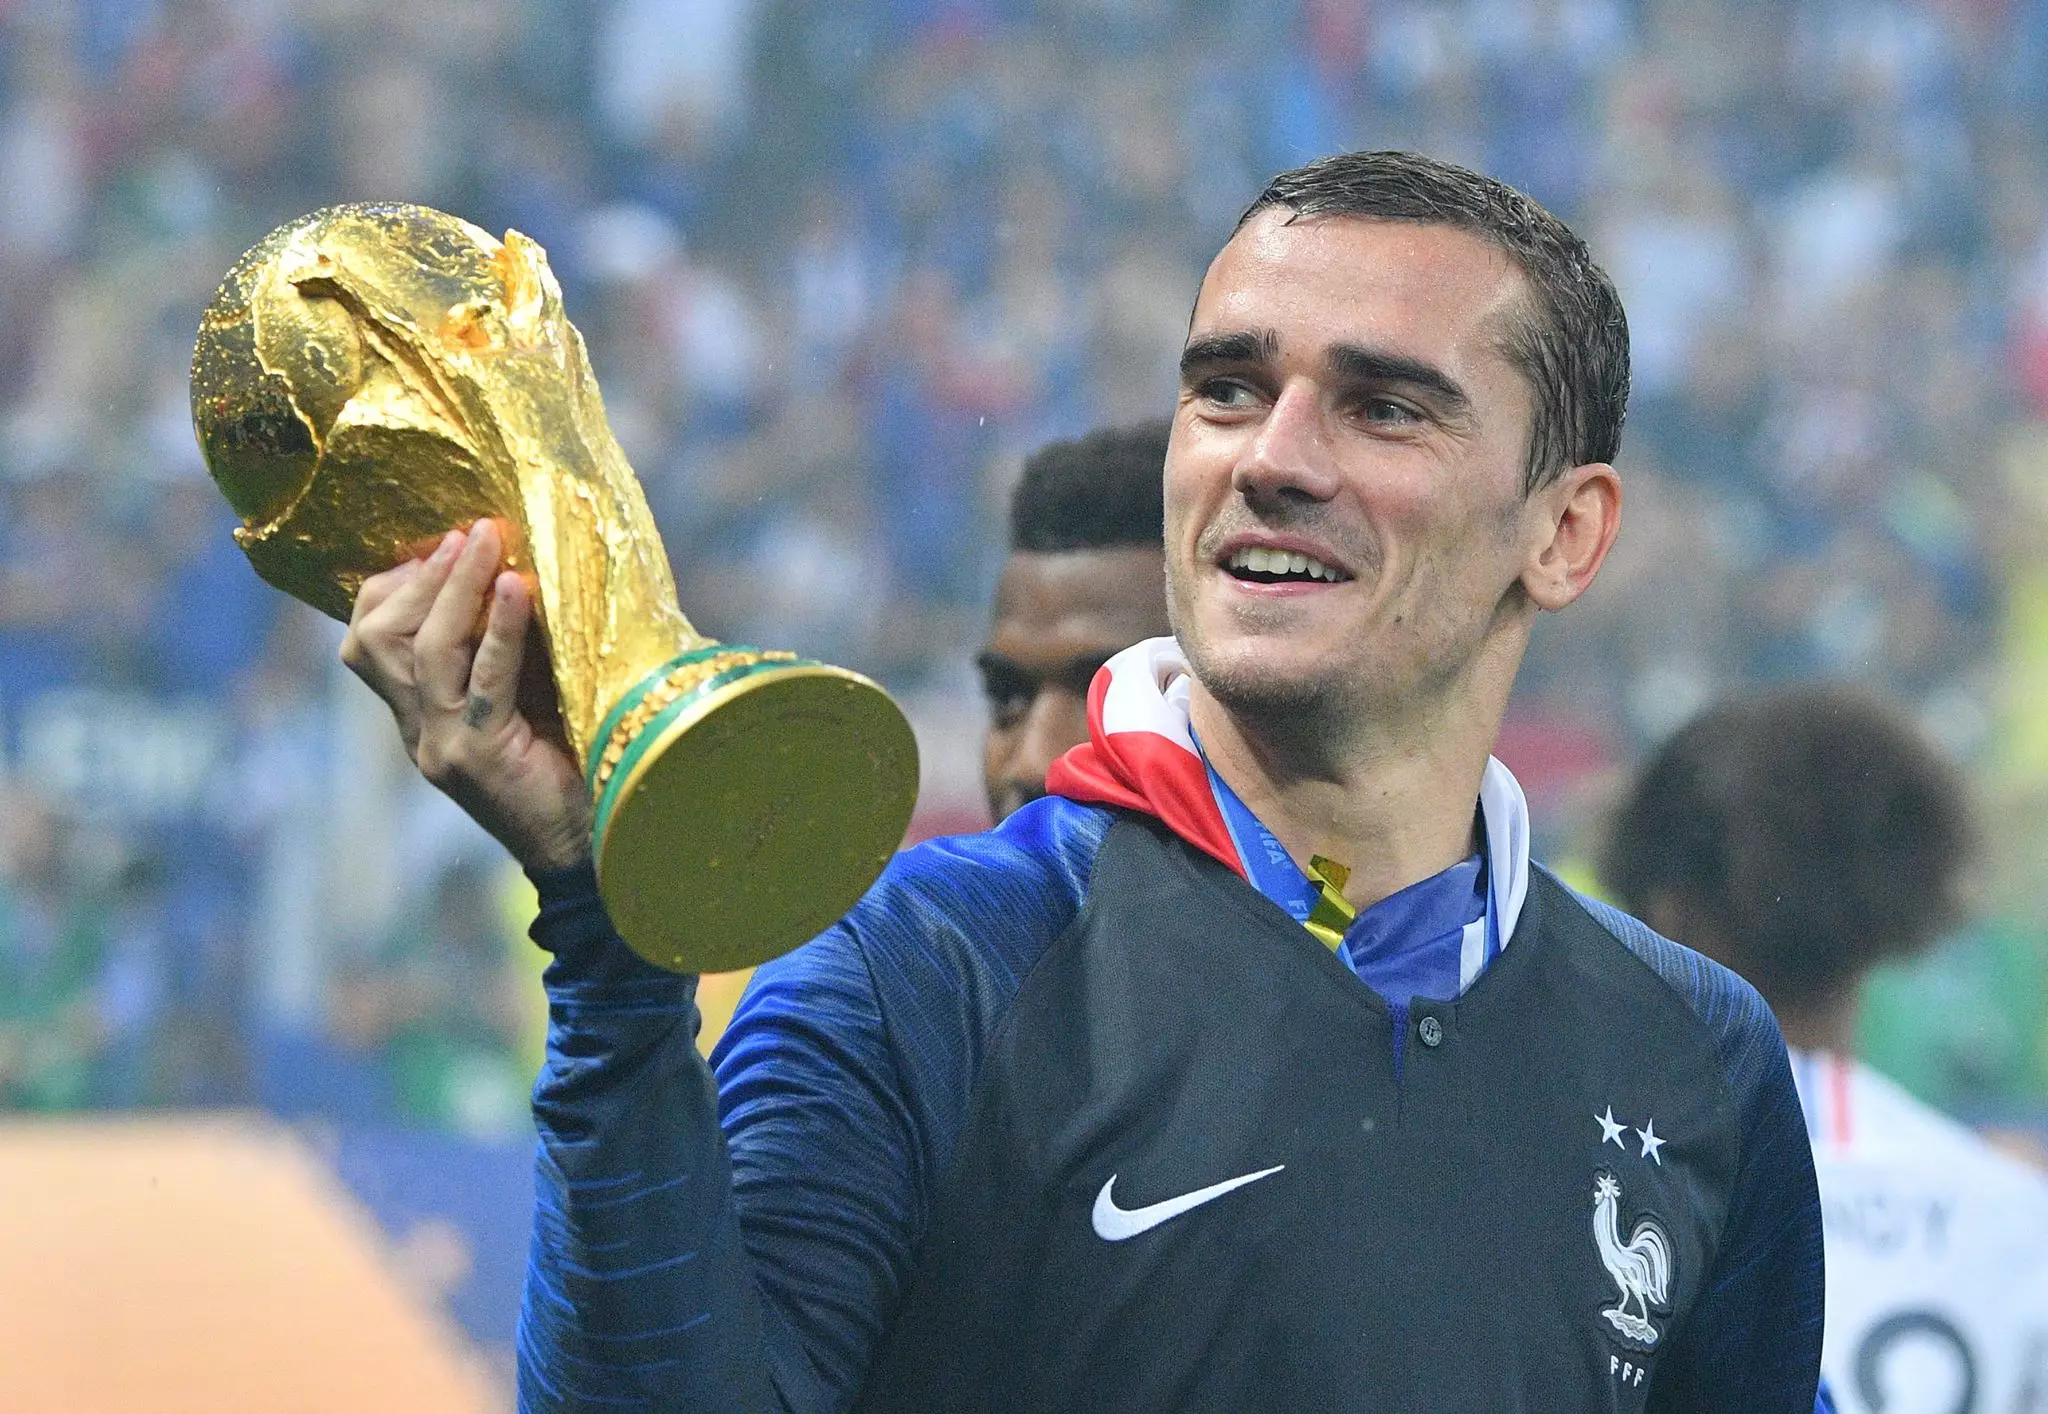 Griezmann lifts the World Cup. Image: PA